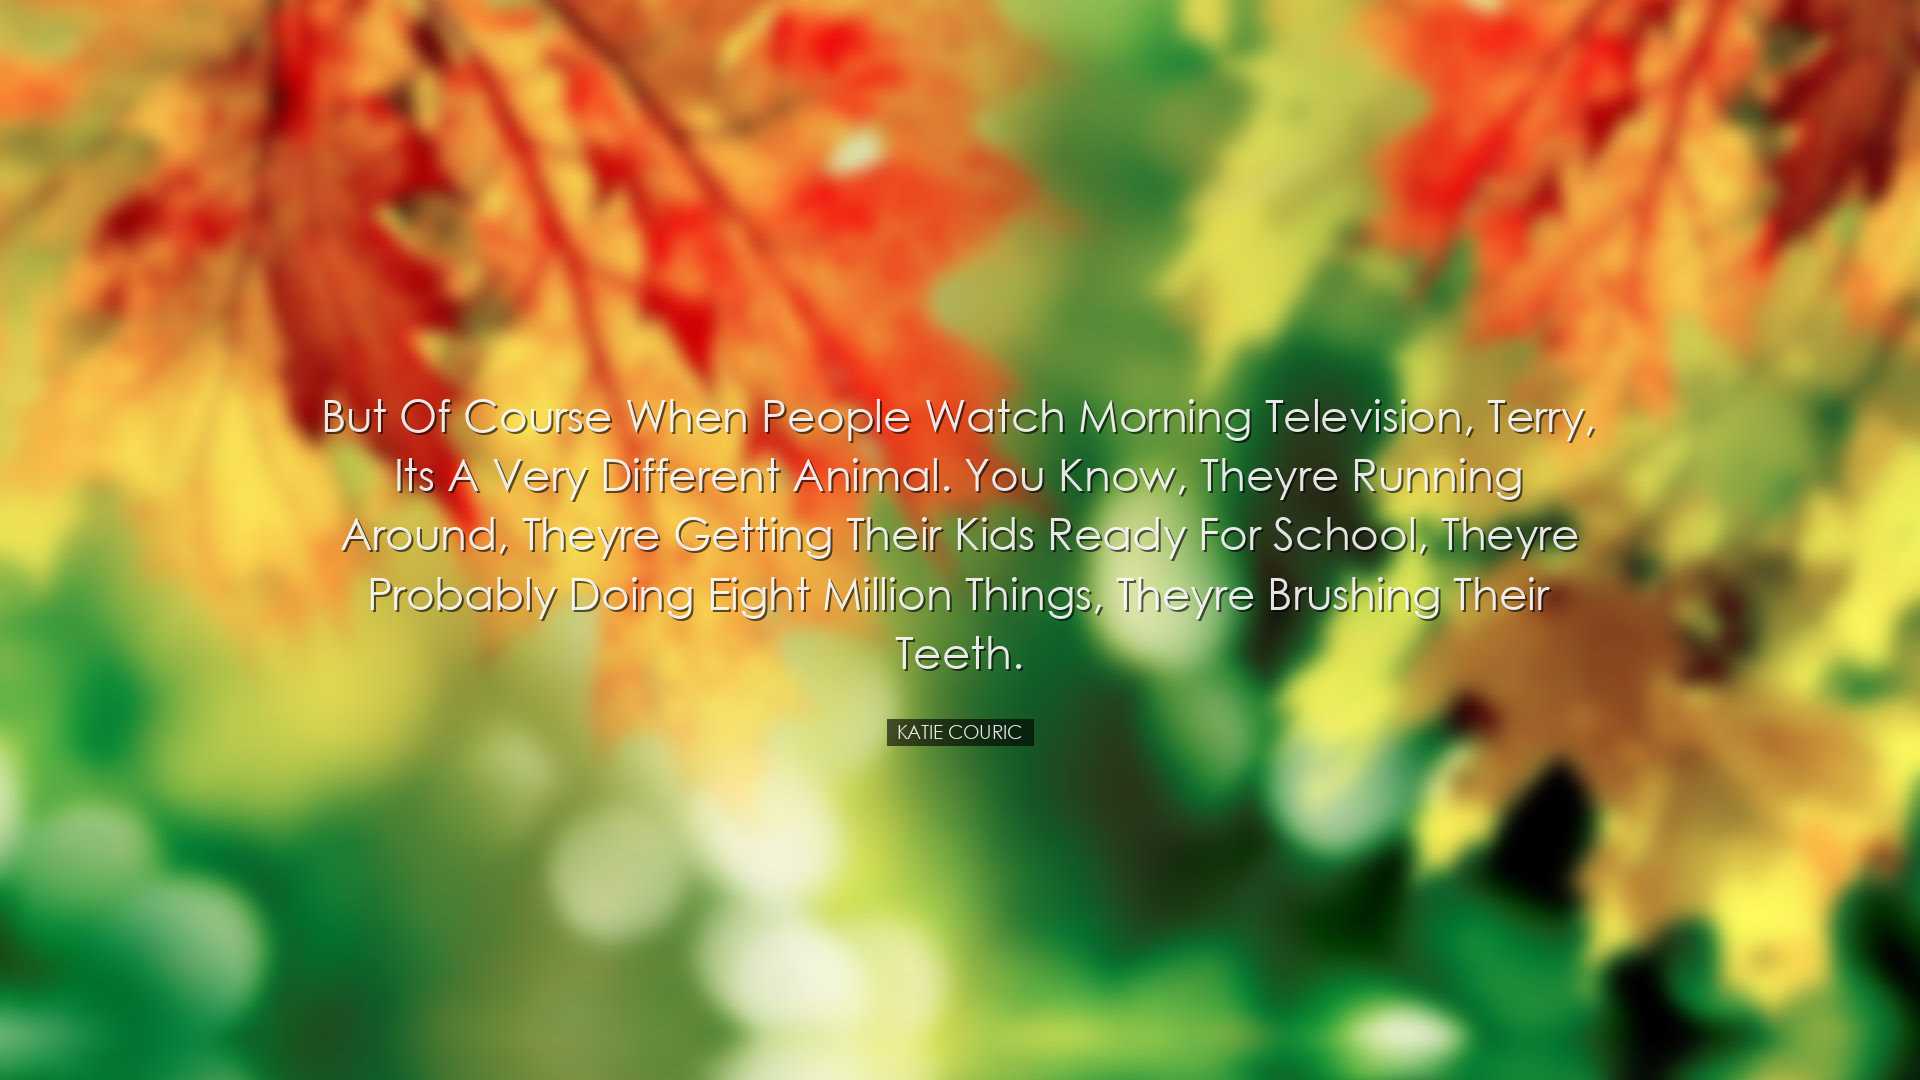 But of course when people watch morning television, Terry, its a v